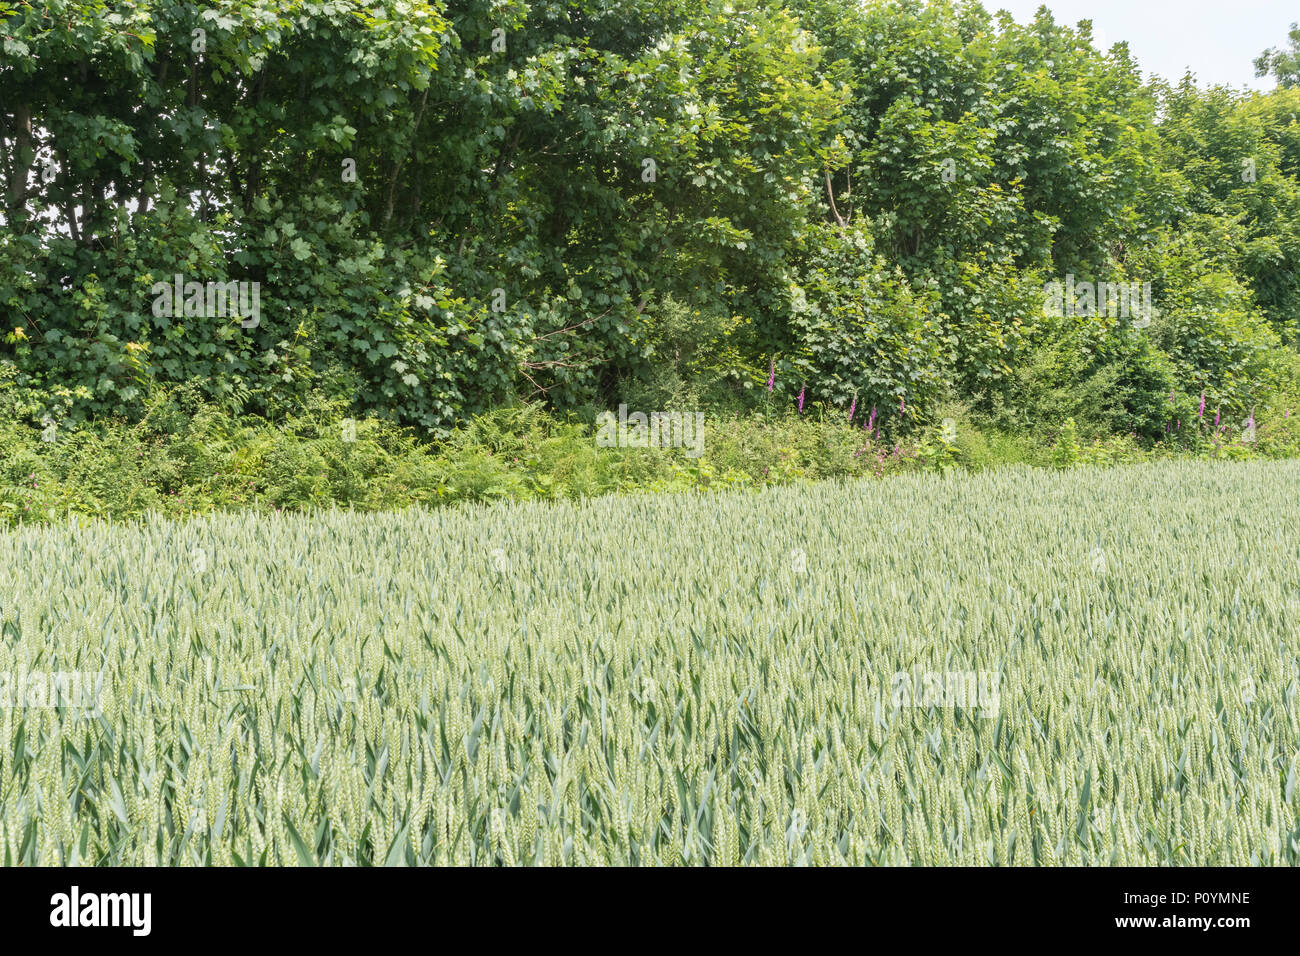 Wheat / Triticum crop growing in front of a natural hedgerow. Food growing in the field. Stock Photo